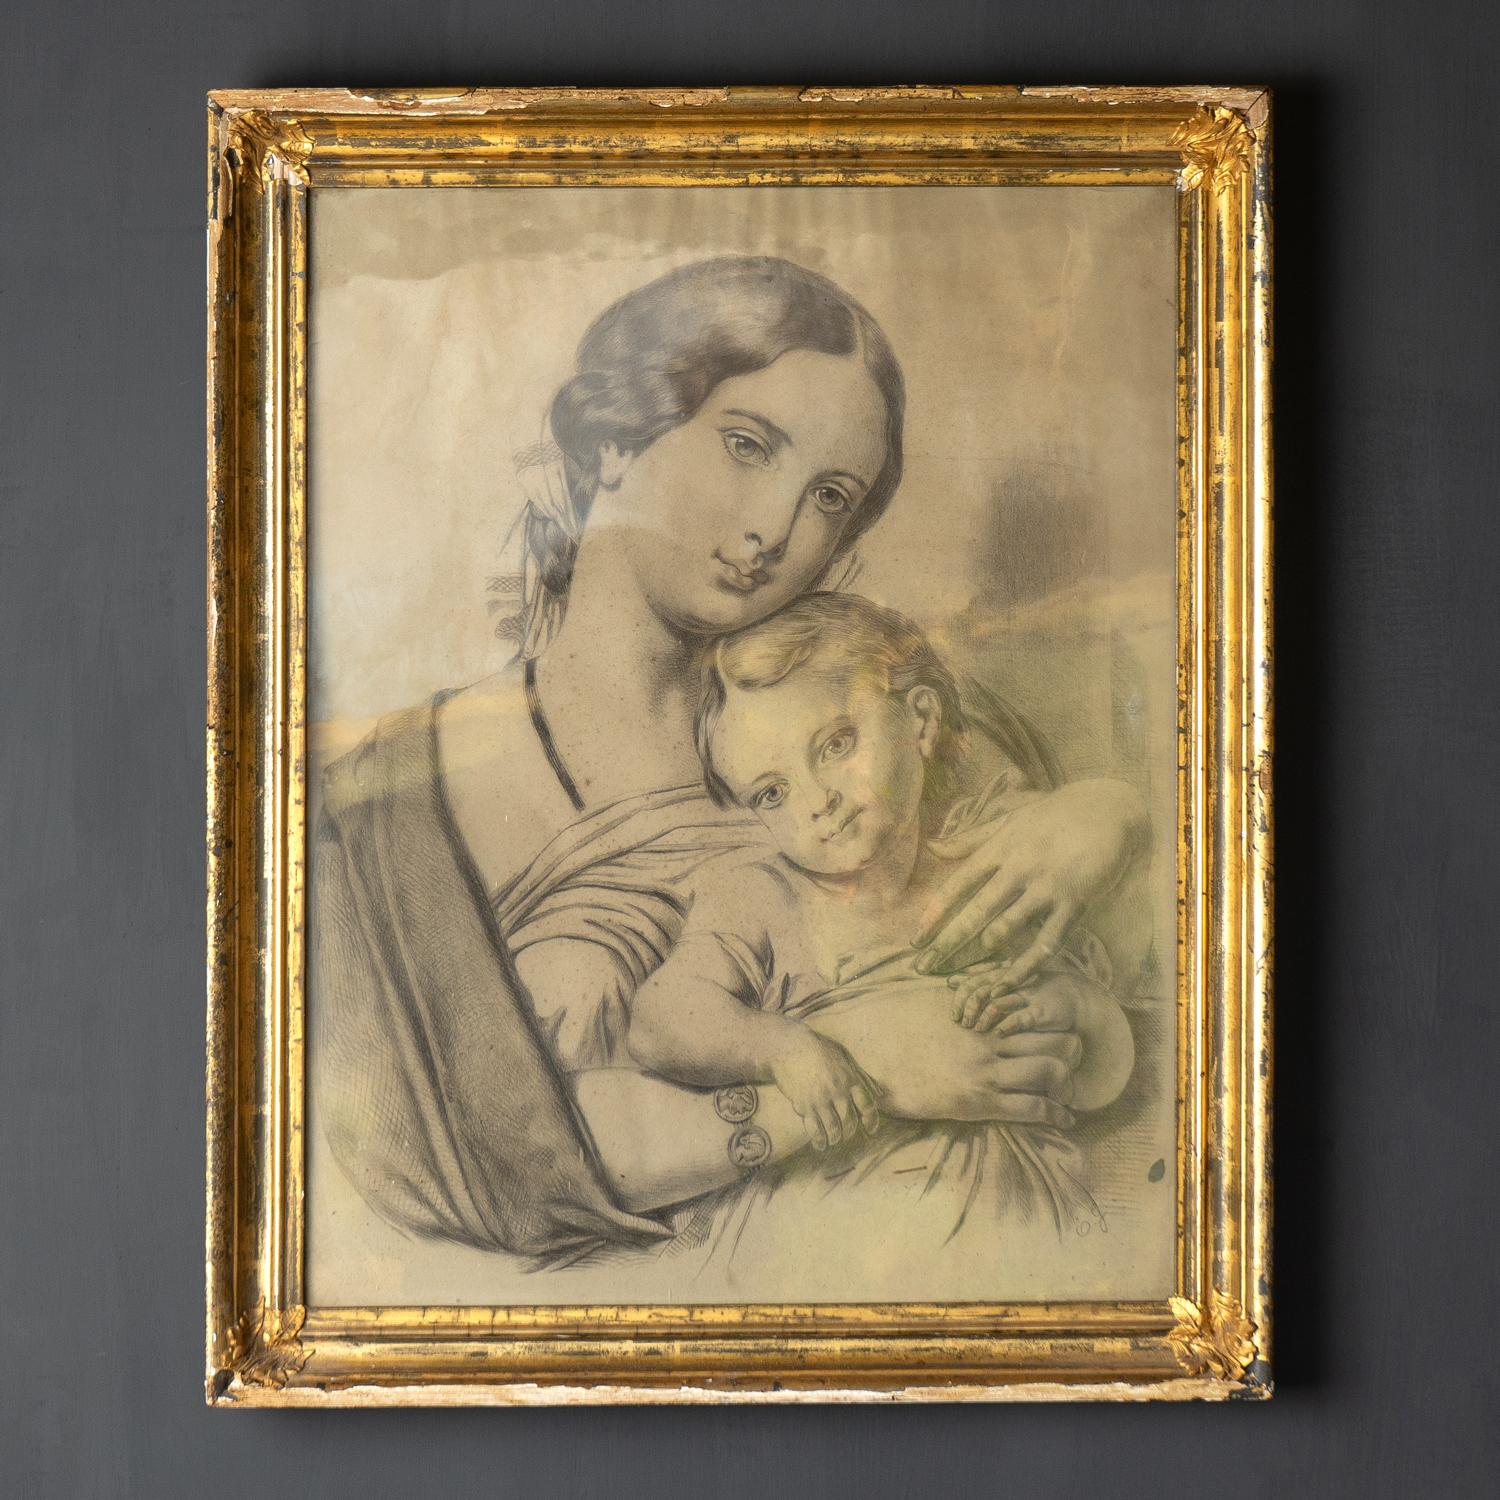 Antique Original Charcoal and Chalk Study Depicting a Woman and Her Baby

An extremely charming portrait study sensitively and skillfully executed.

Framed and glazed in its original gilt frame.

The drawing is in good vintage condition with some